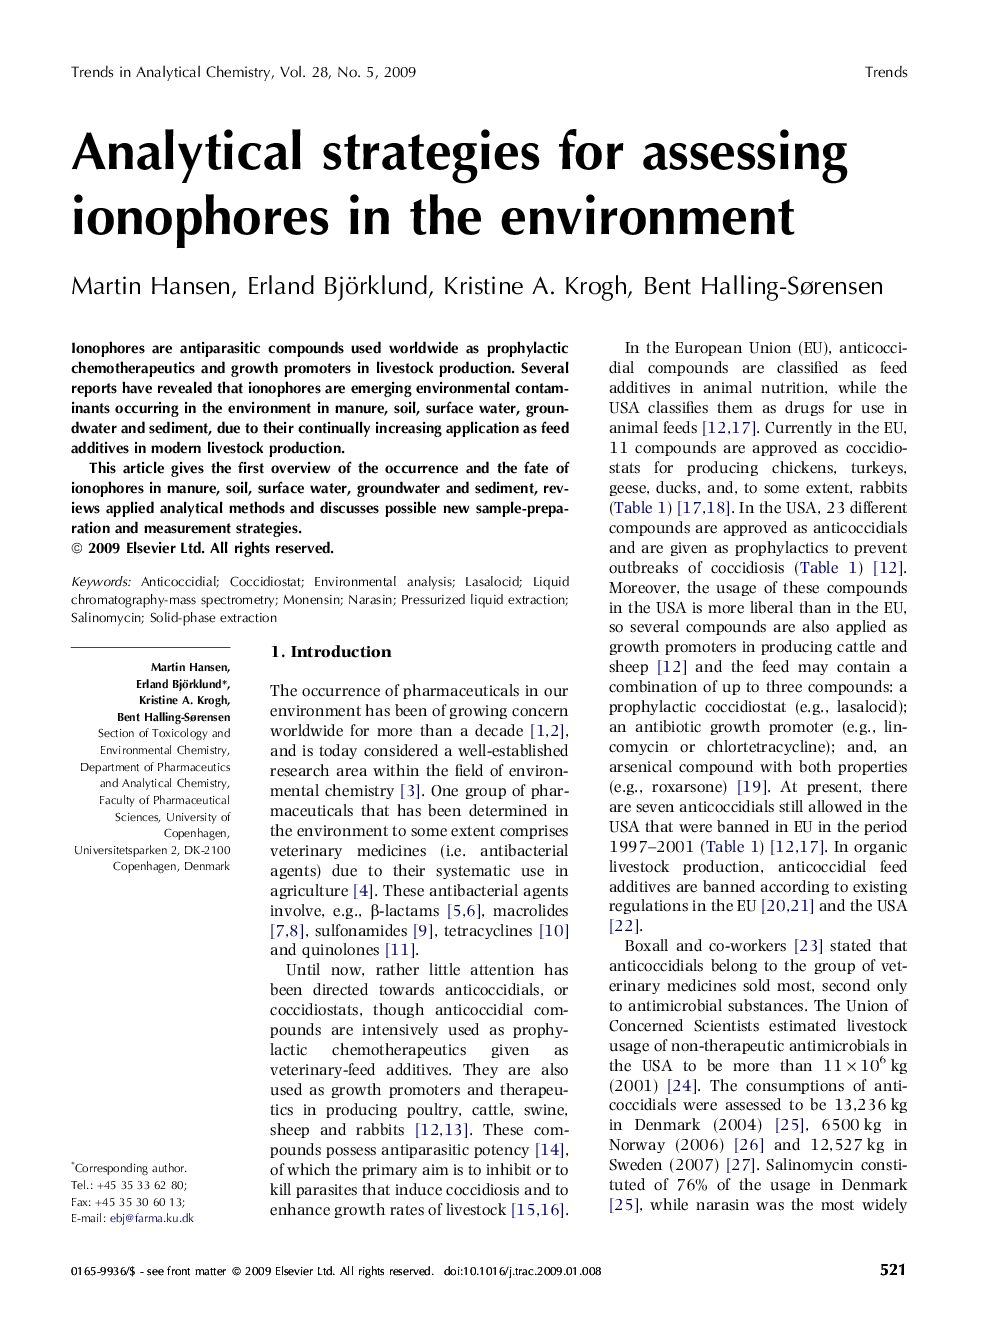 Analytical strategies for assessing ionophores in the environment